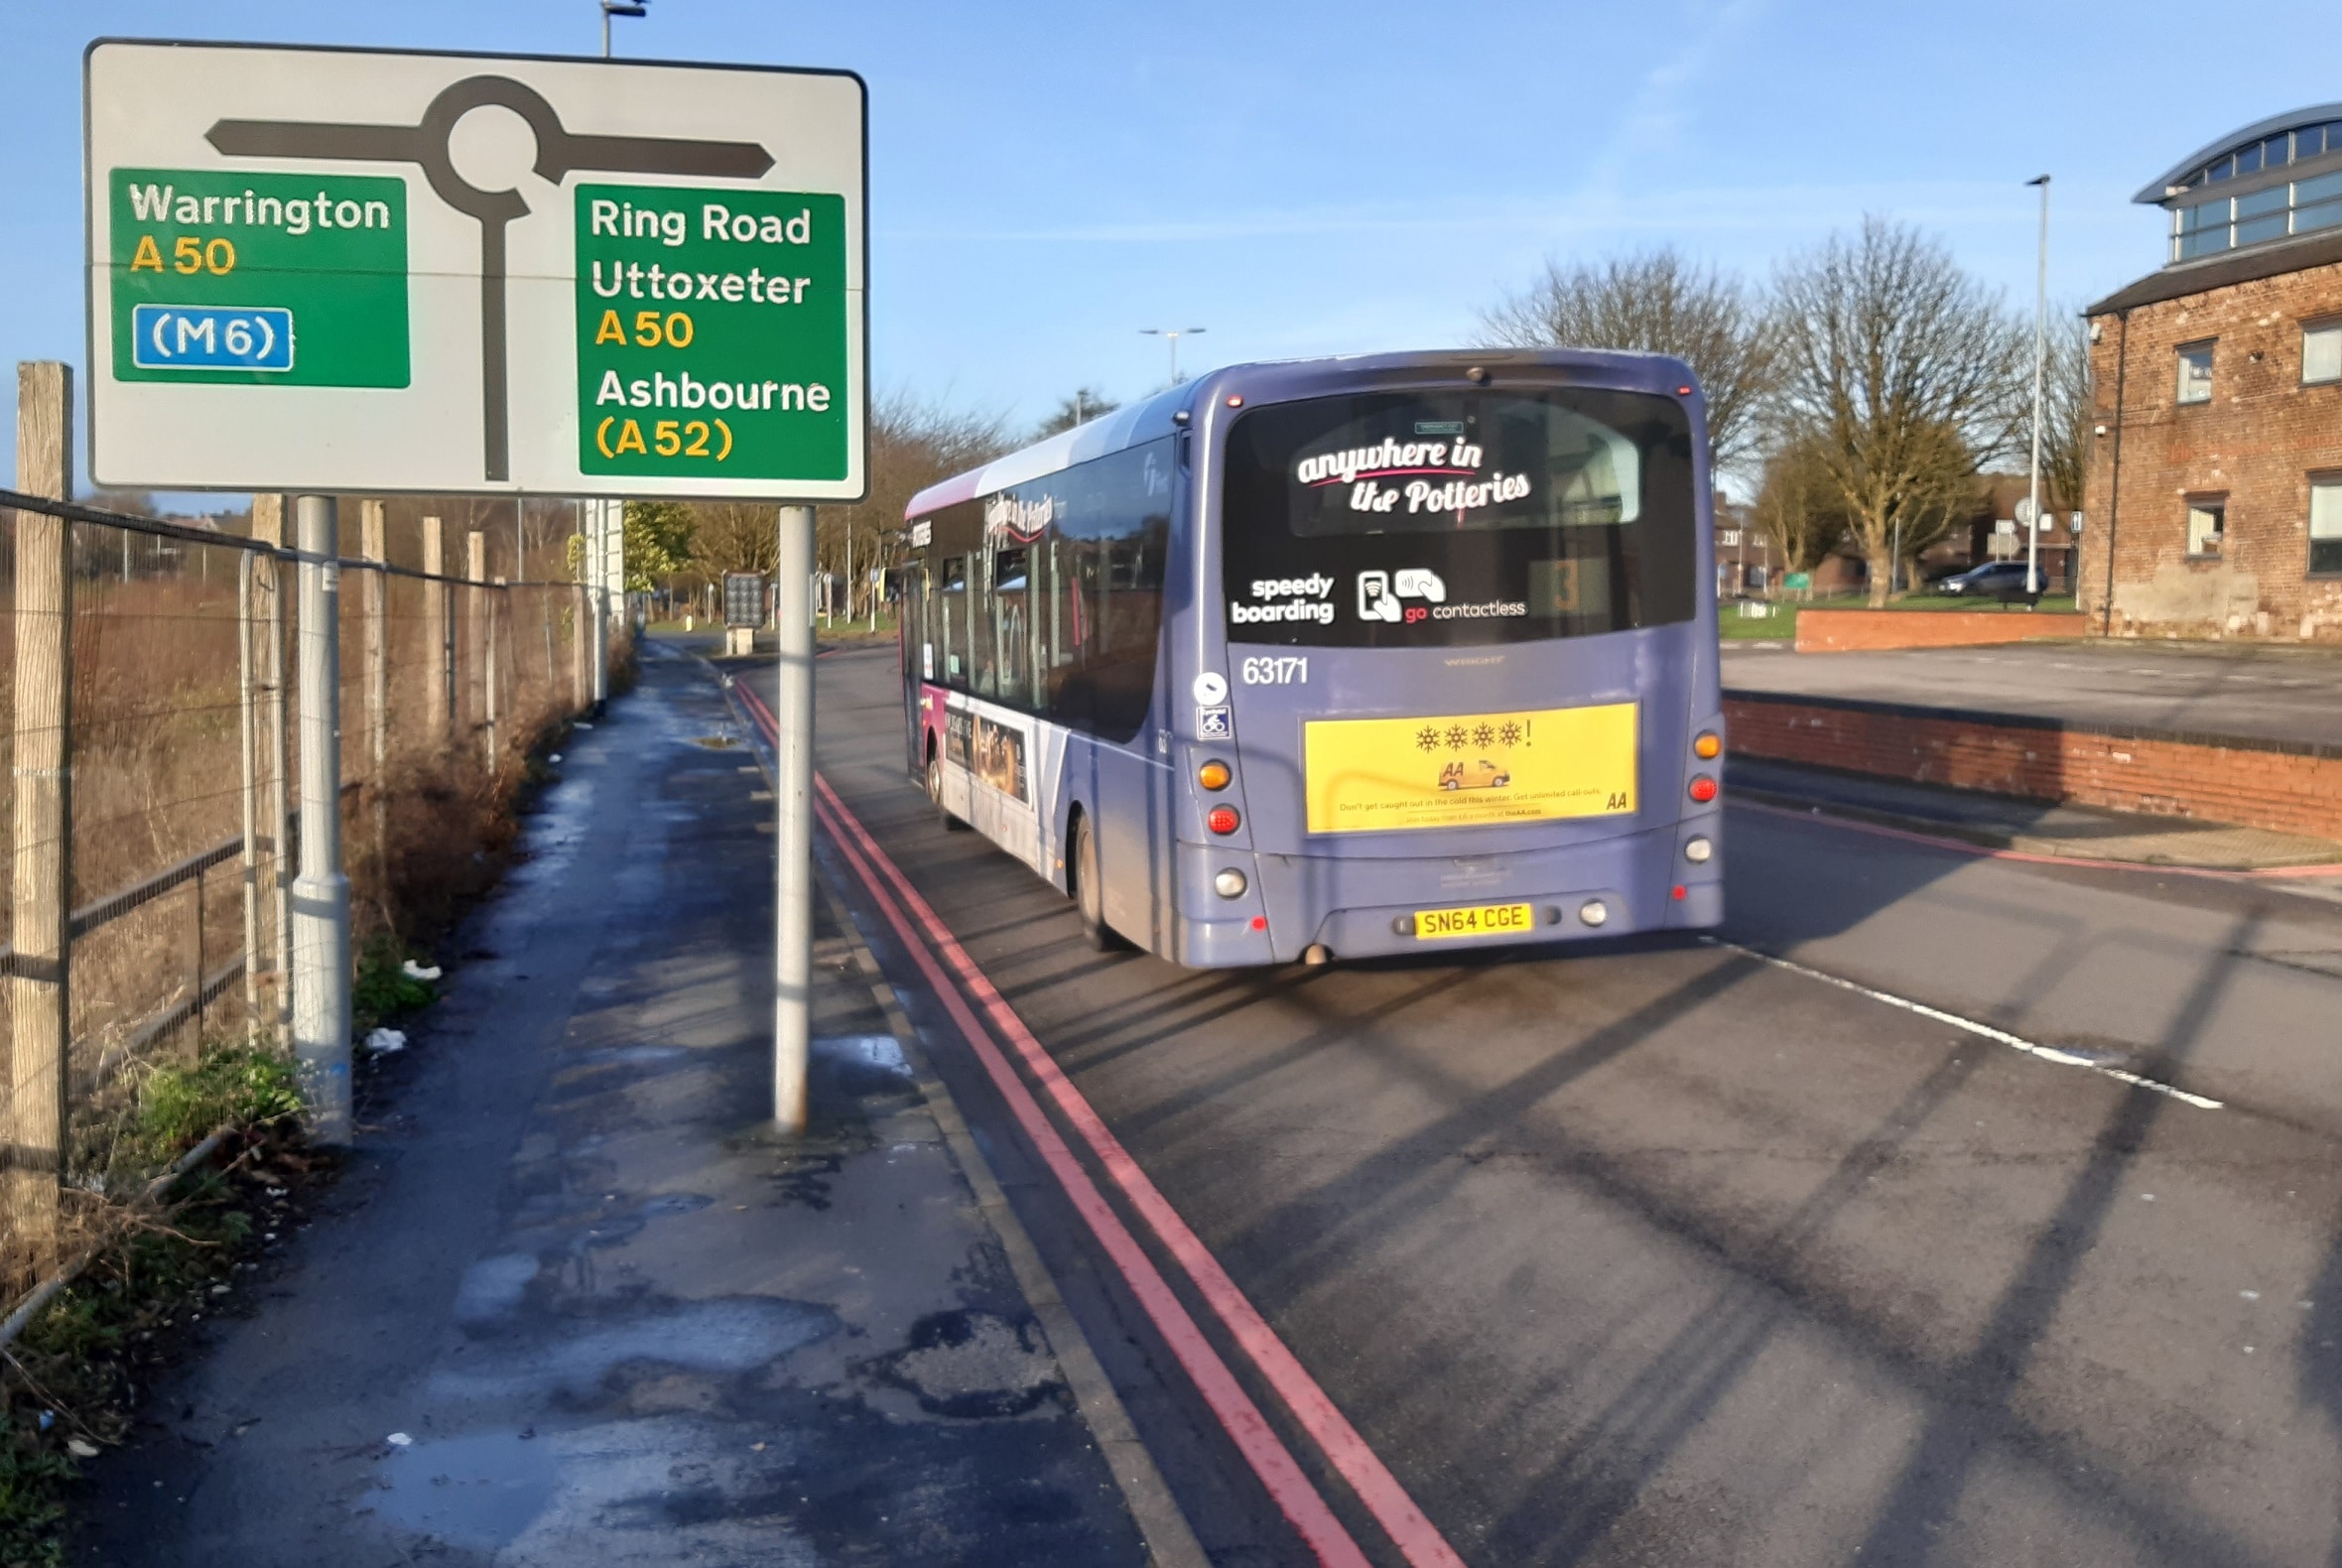 Stoke on Trent City Council BSIP seeks £16m National Bus Strategy money for roadbuilding